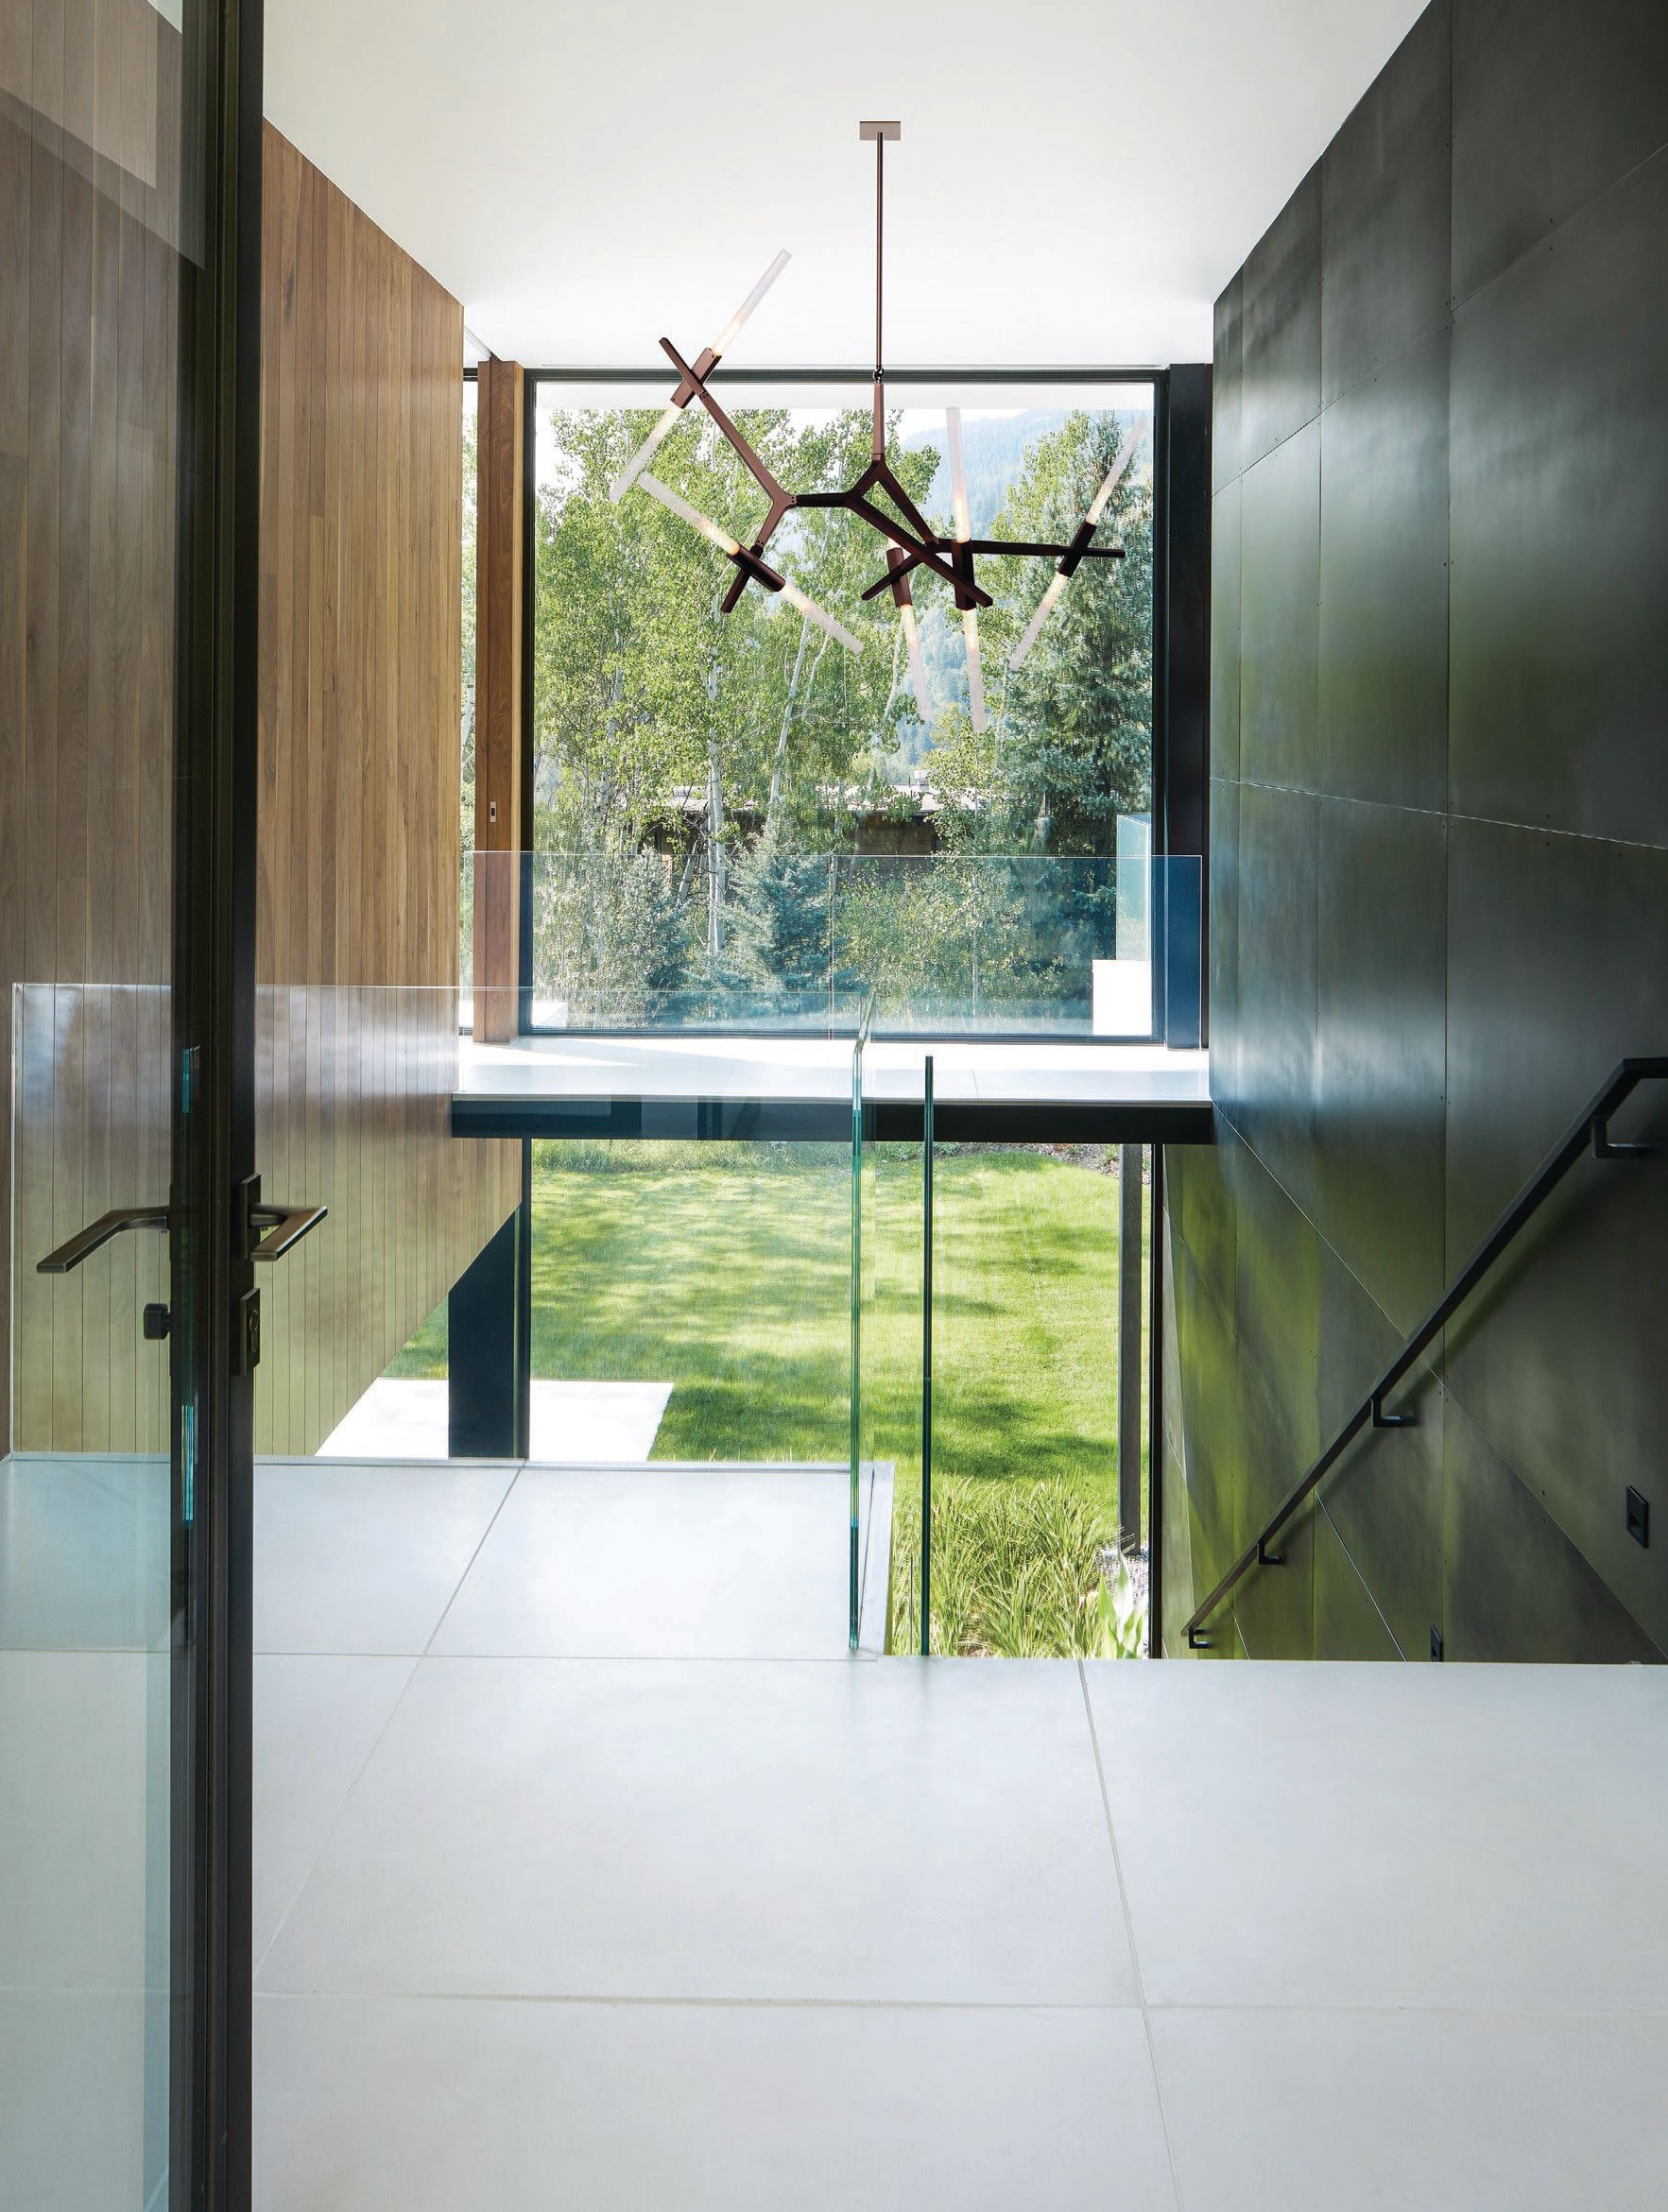 The double-height black patina steel and walnut entry introduces materials prevalent within the house and a glimpse of the lawn at the rear. The bronze Agnes 10-light chandelier by Lindsey Adelman is from Roll & Hill. PHOTOGRAPHED BY DAVID MARLOW